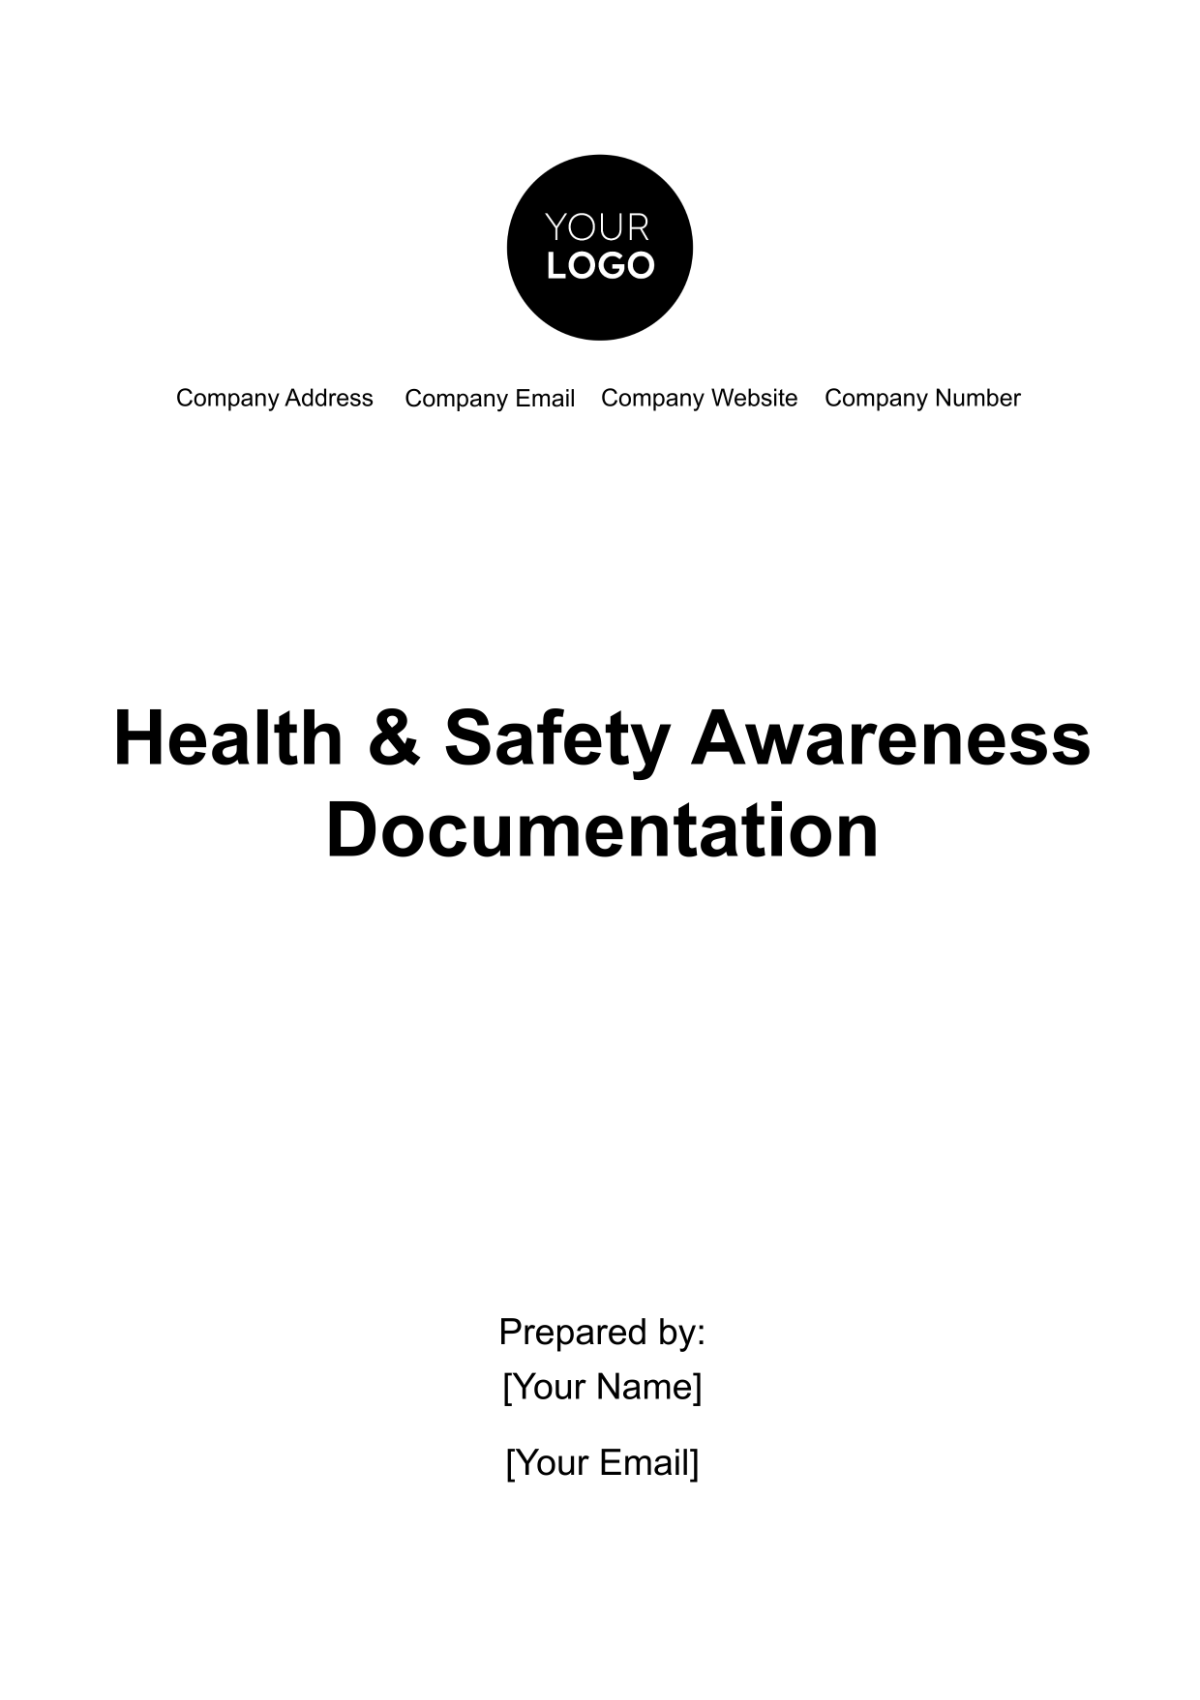 Free Health & Safety Awareness Documentation Template